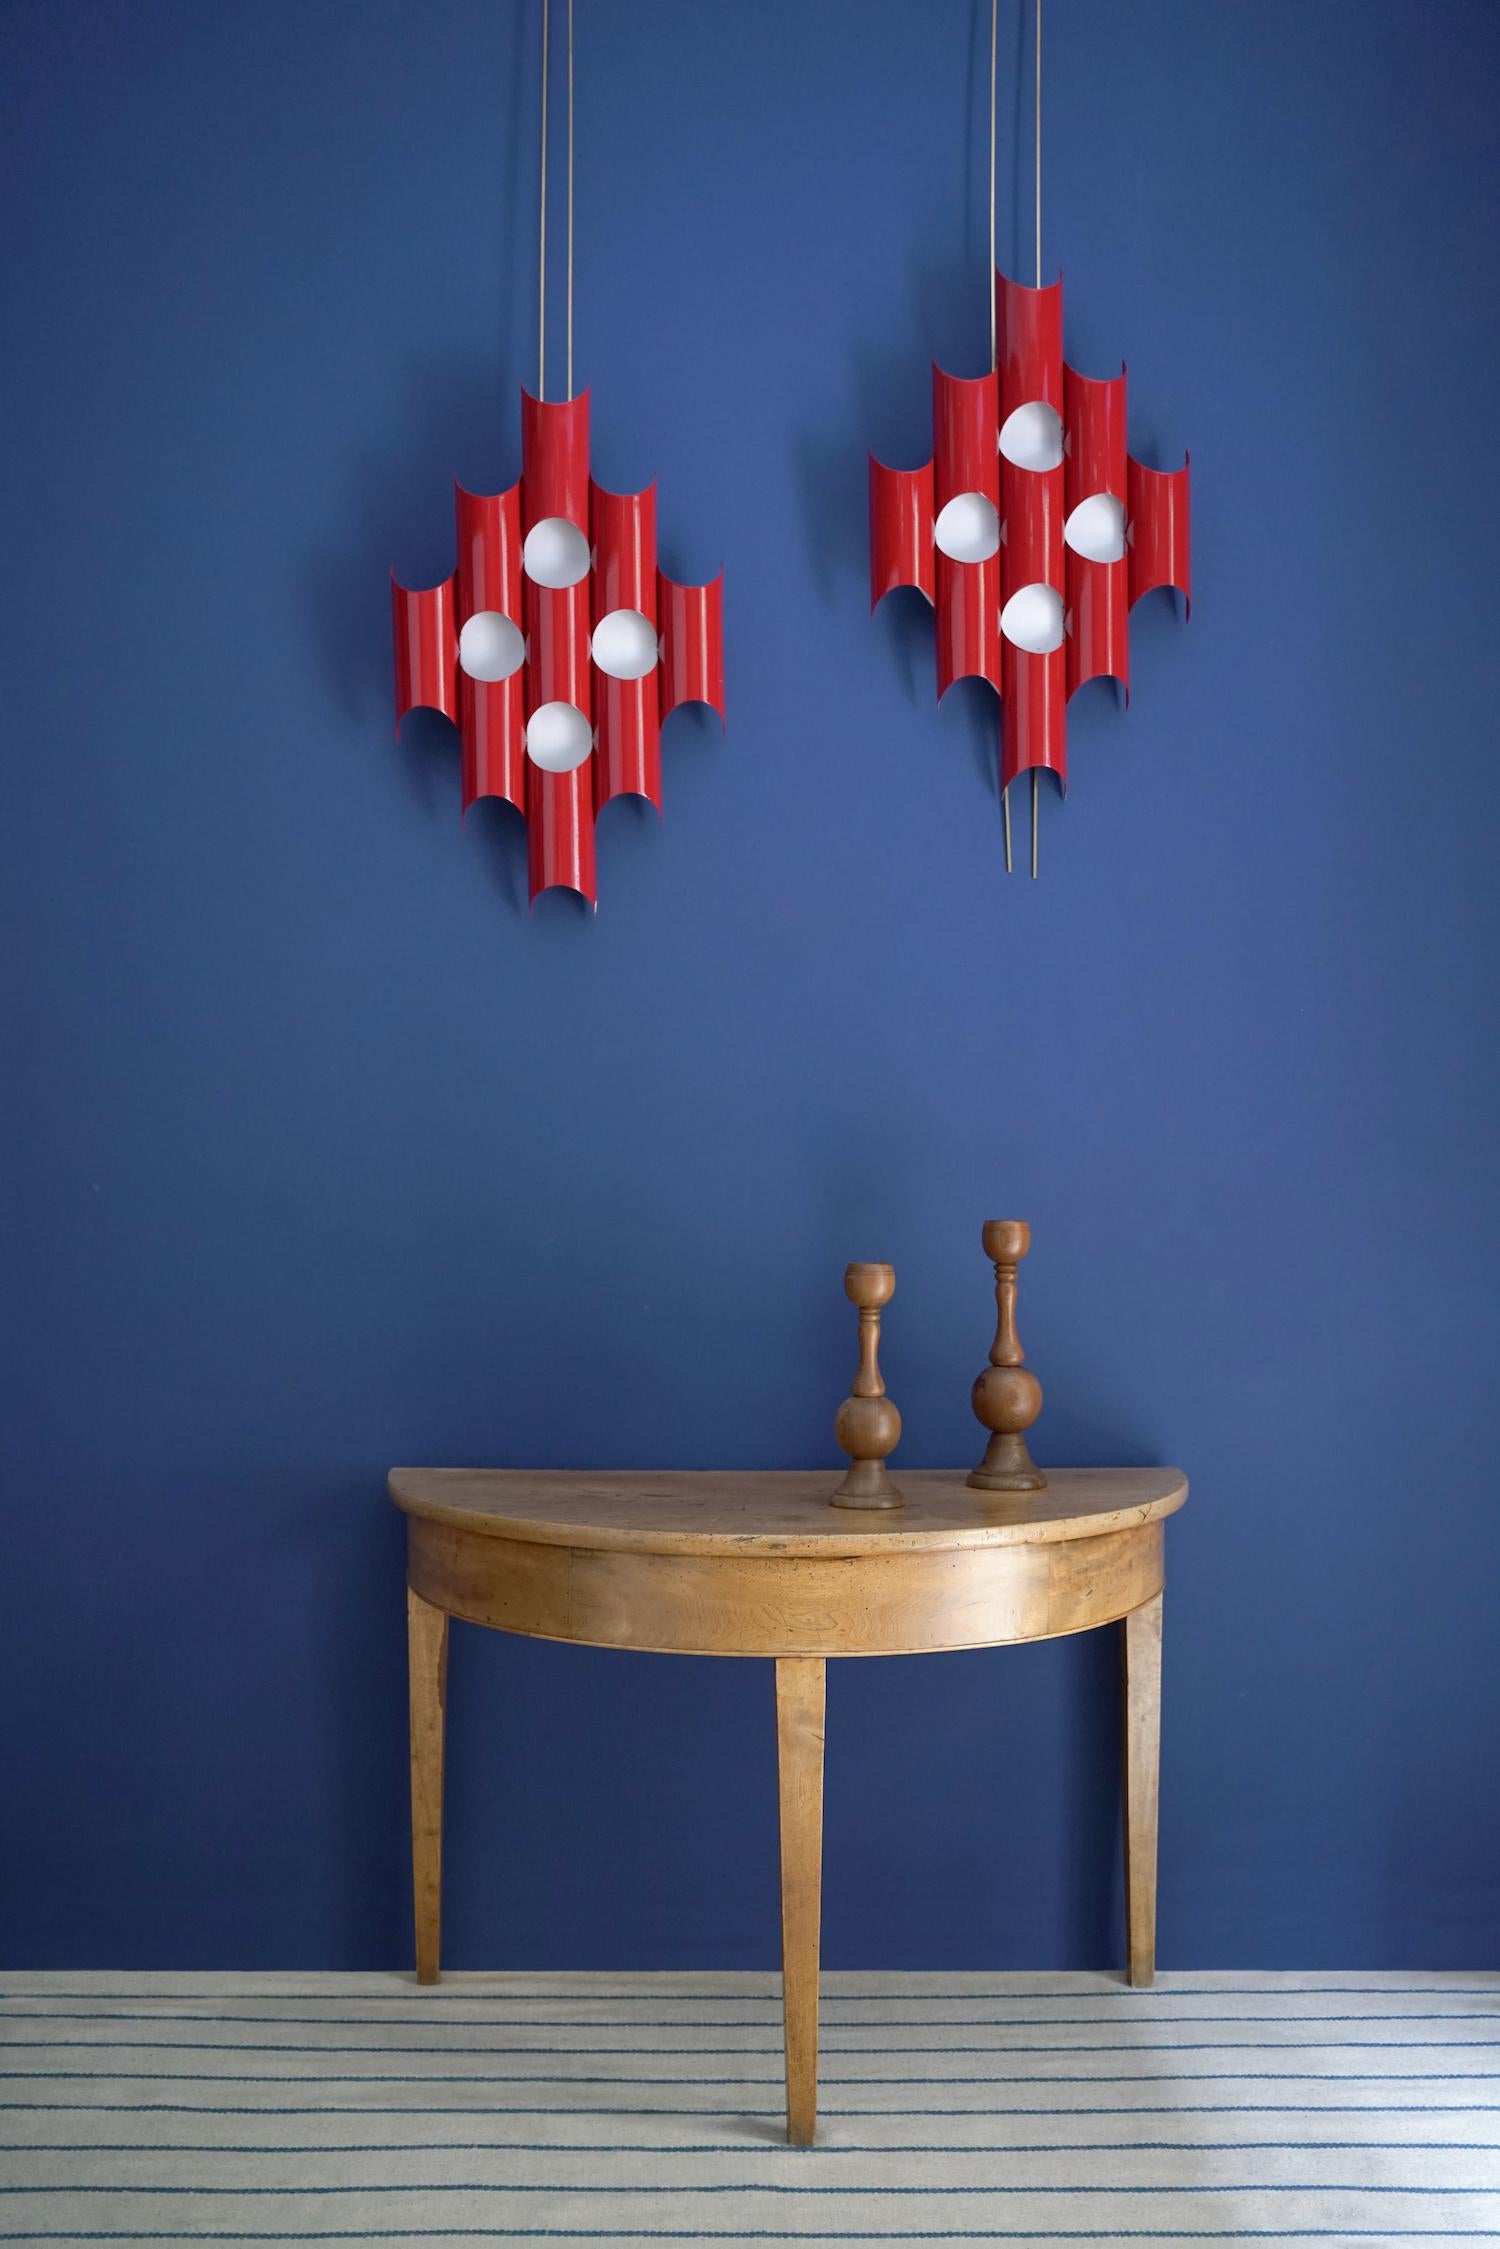 Pair of large wall lamps by the Italian designer Goffredo Reggiani with 10 light points each and tubular structure lacquered in the original red colour.

